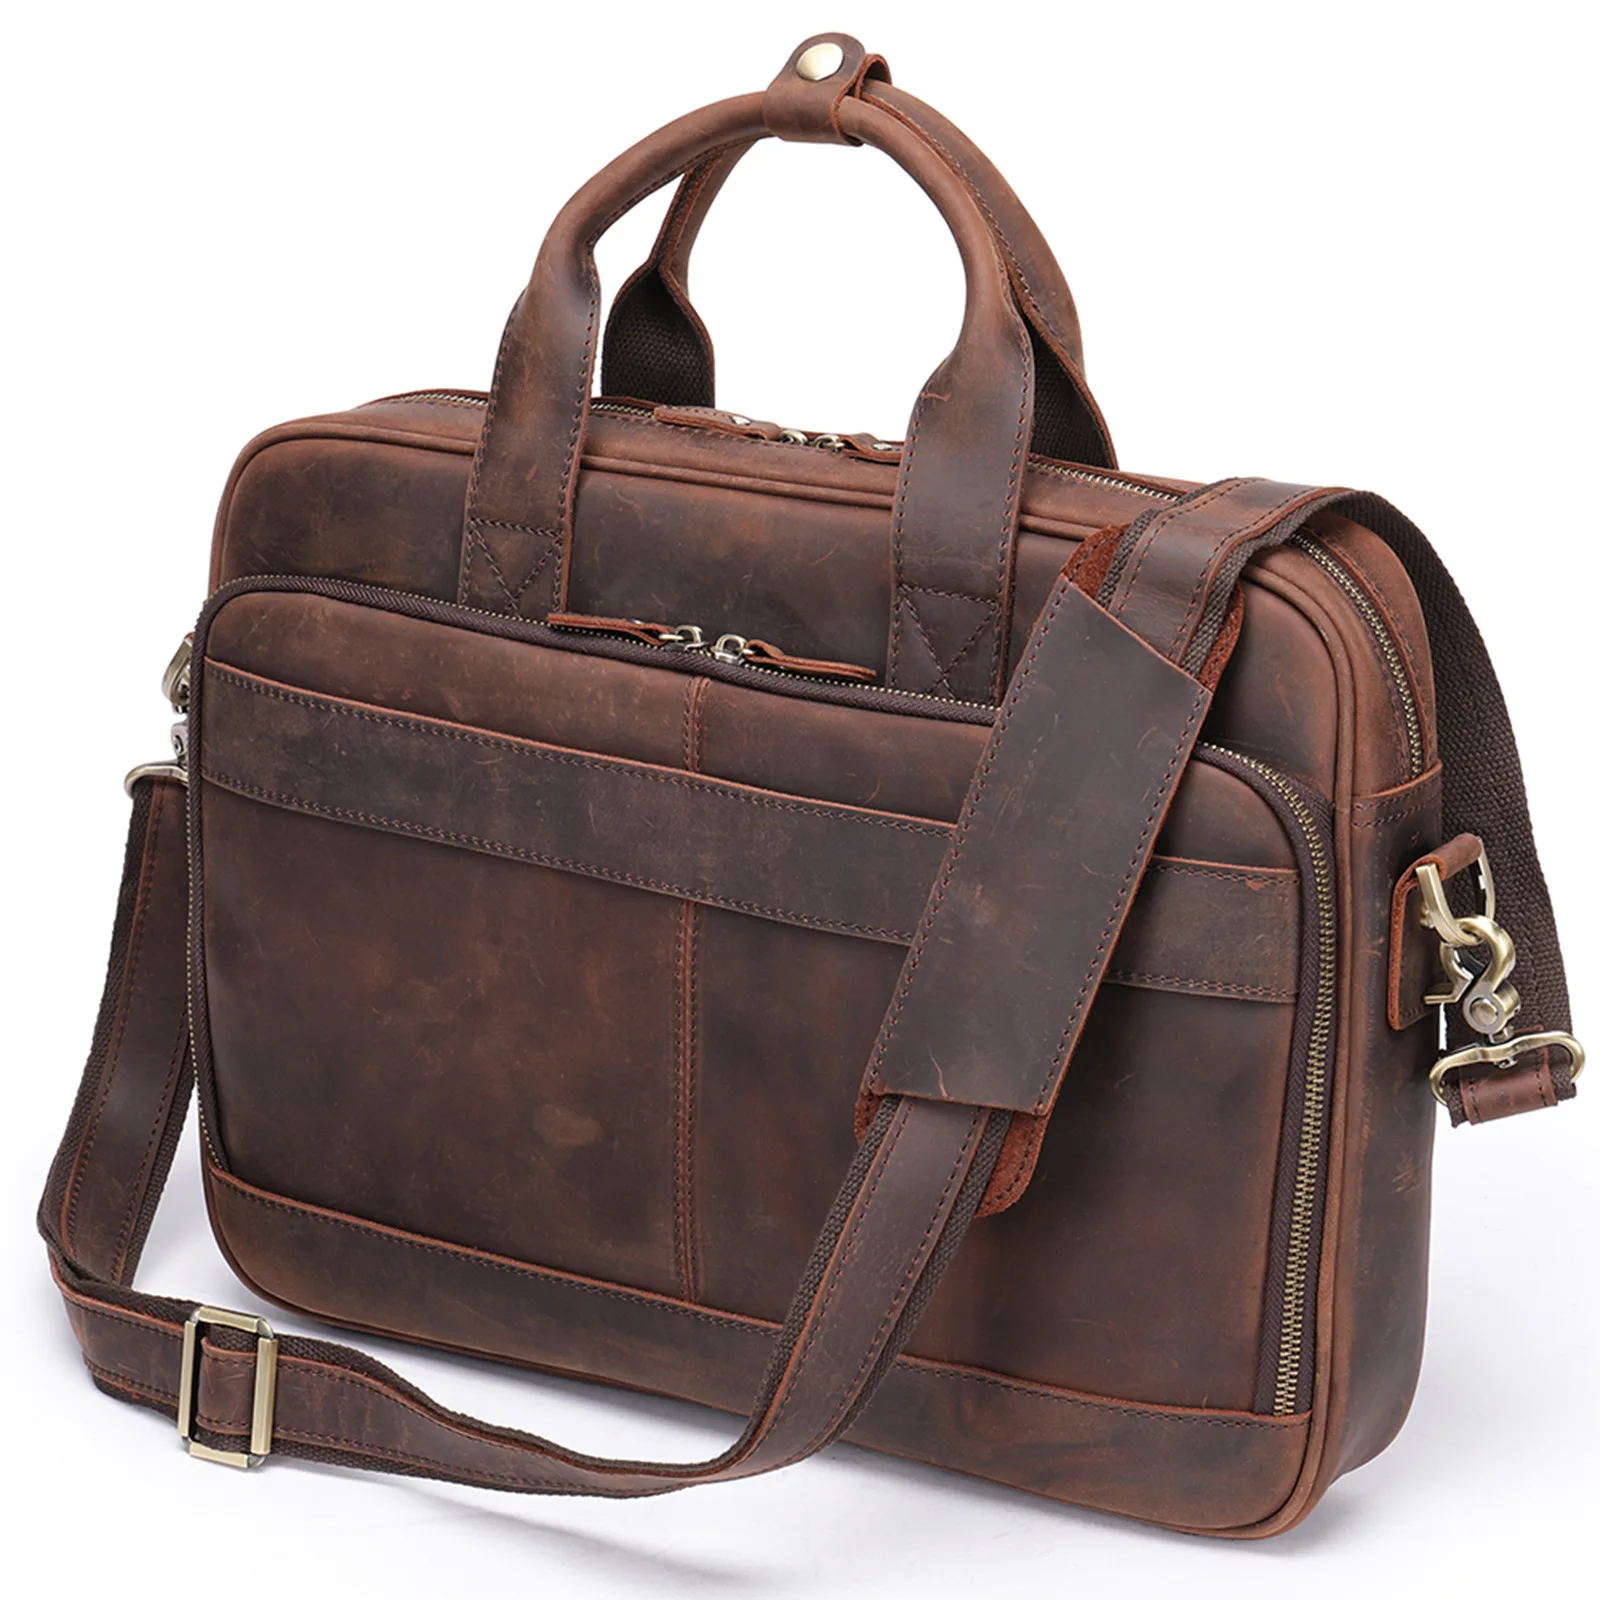 

Handbags Briefcase Laptop Bag Working Daily Male Bag Bag Documents Casual Retro Leather Pad Genuine For Bags Men 15.6 Tote